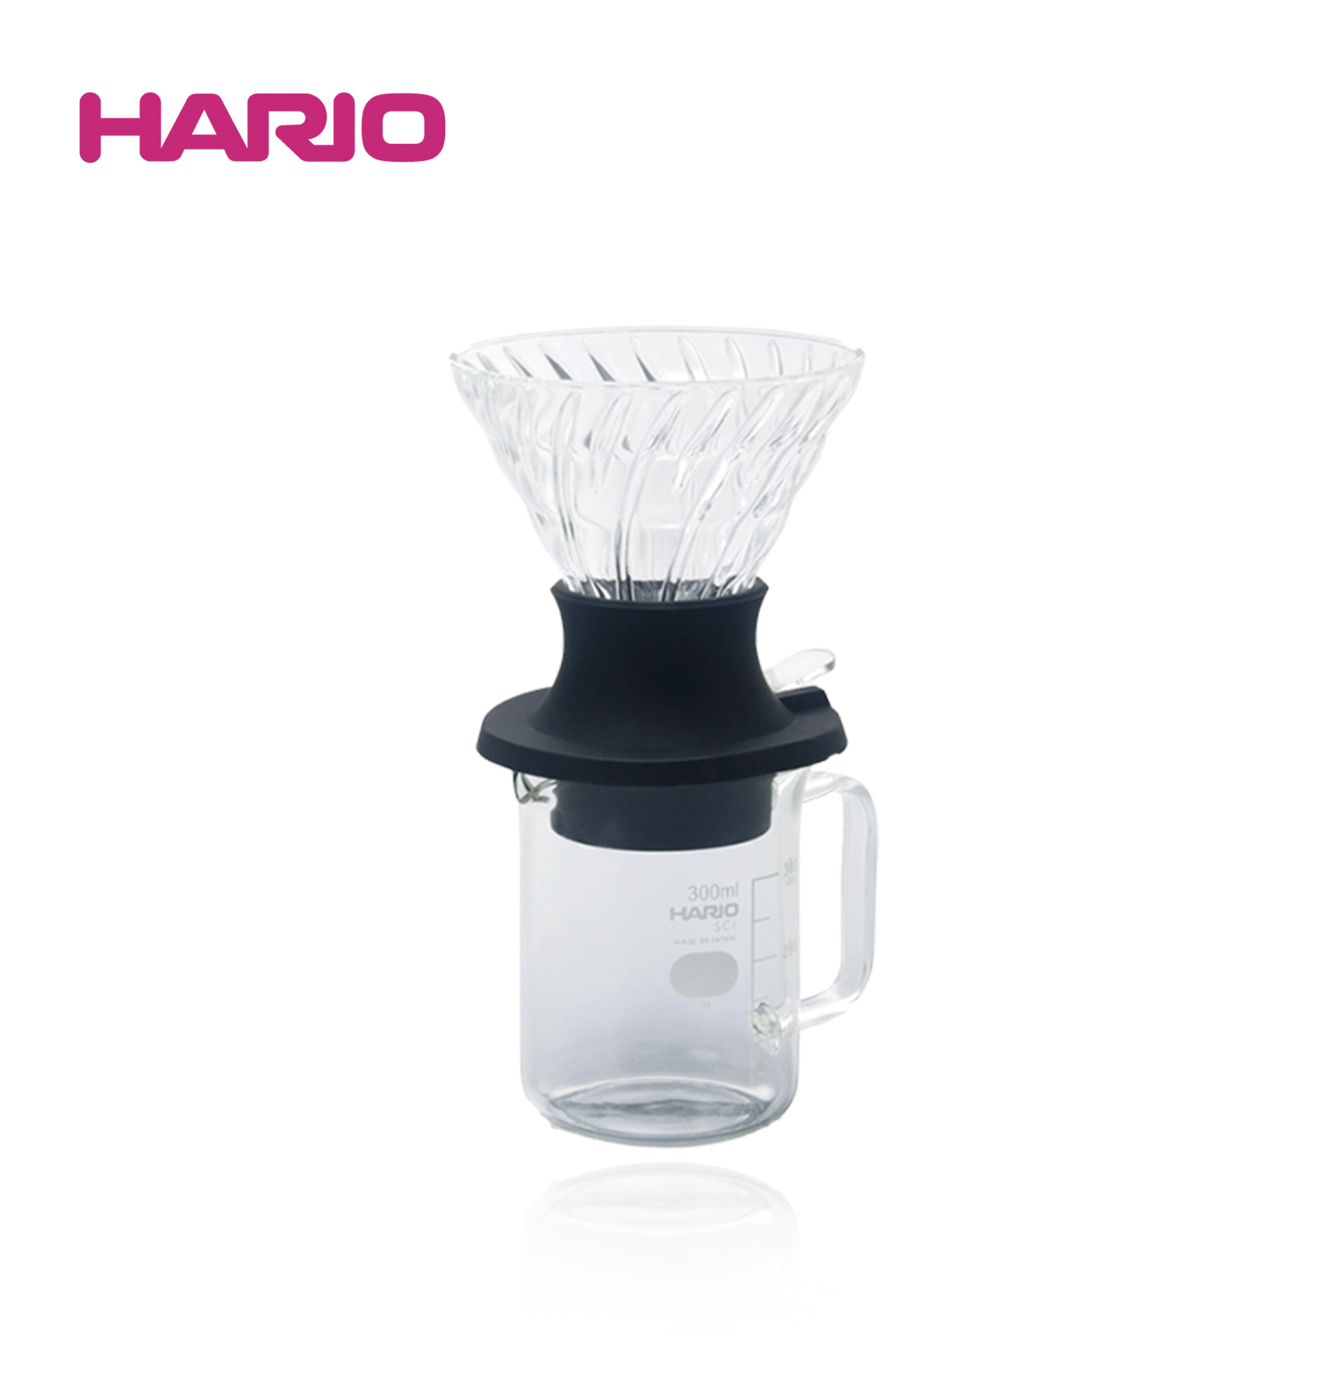 Hario V60 Immersion Switch Dripper Set